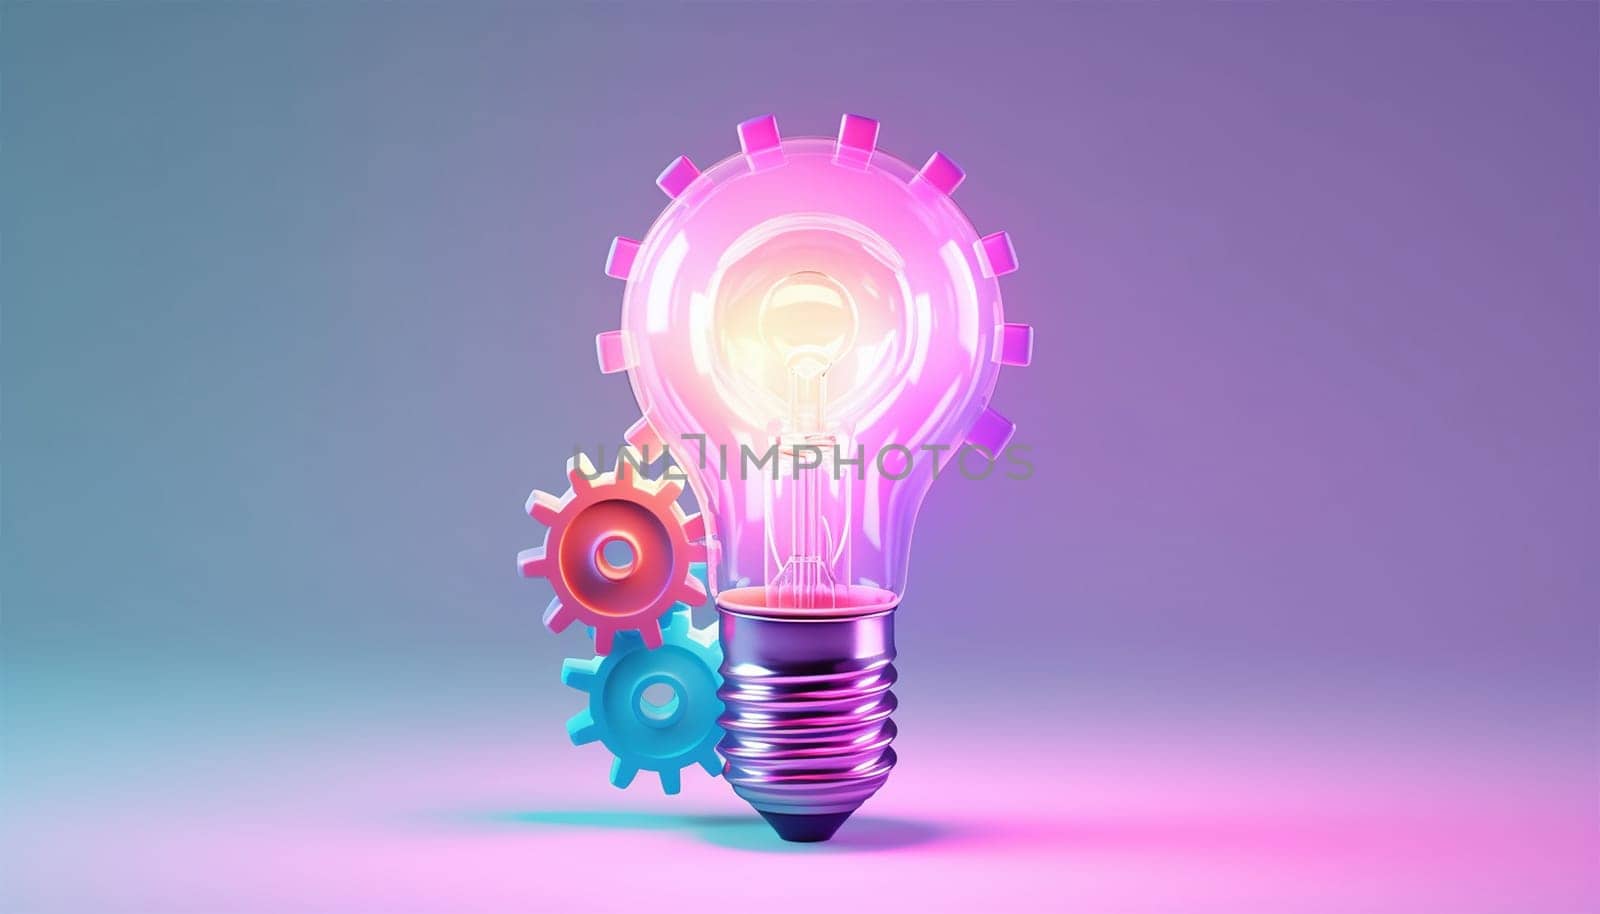 Light bulb and gears 3d render. Innovation concept. Insight icon isolated on pastel background. 3D Illustration. Pink,purple and blue. Glow Idea,teamwork,brainstorming design by Annebel146